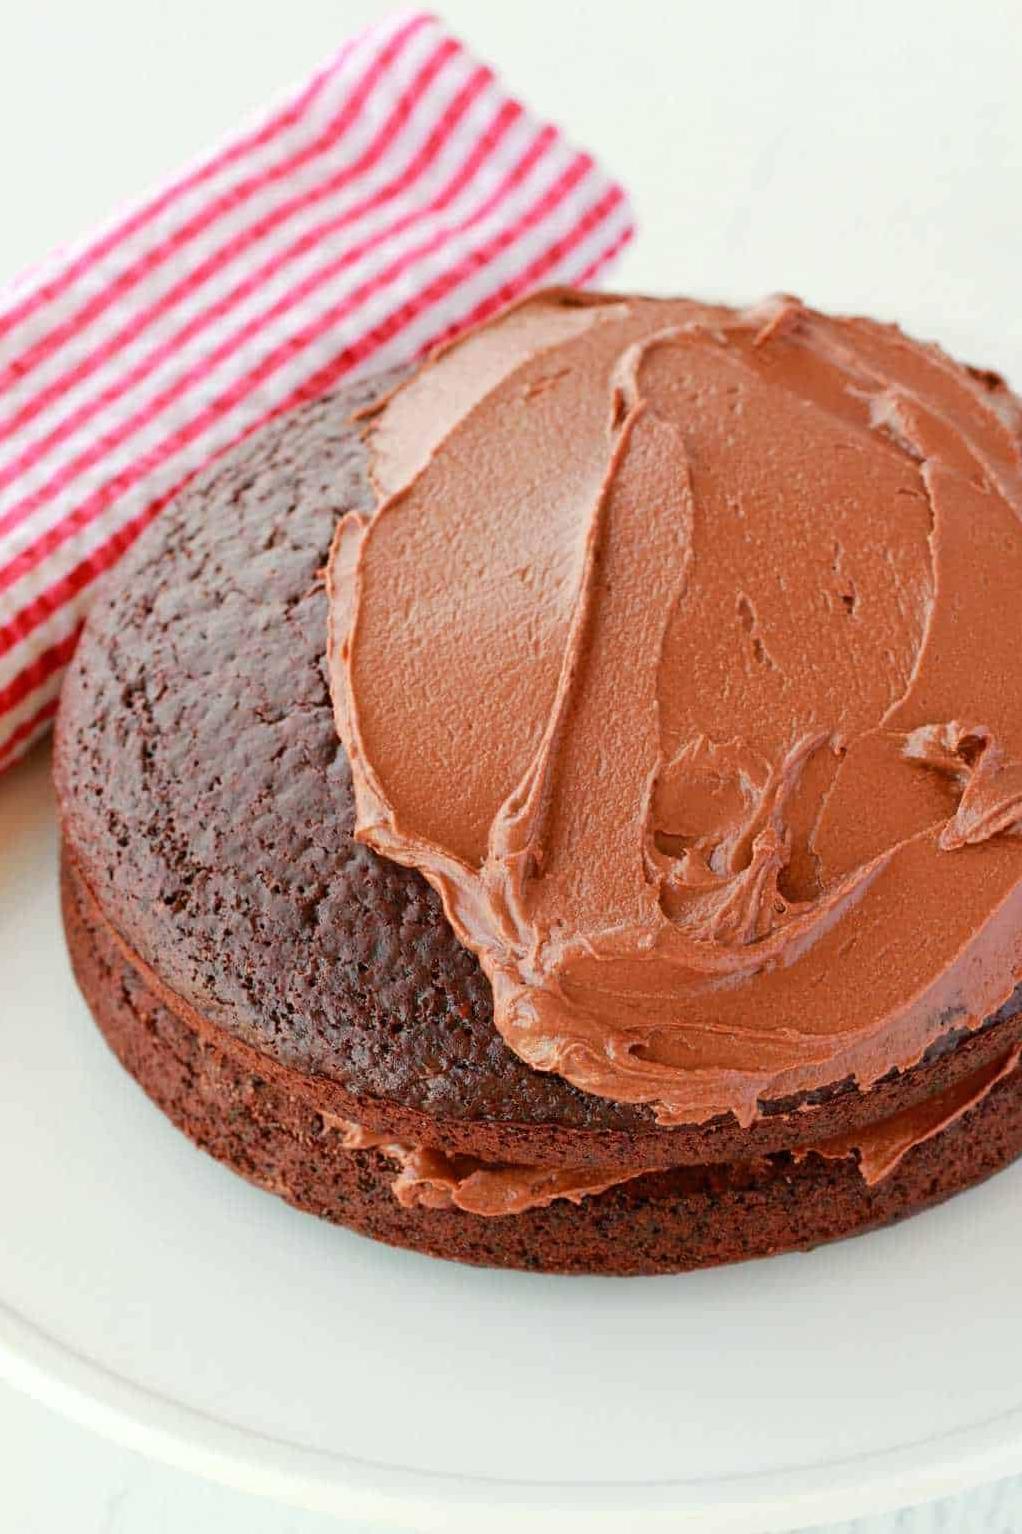 Rich and Decadent Vegan Chocolate Frosting Recipe